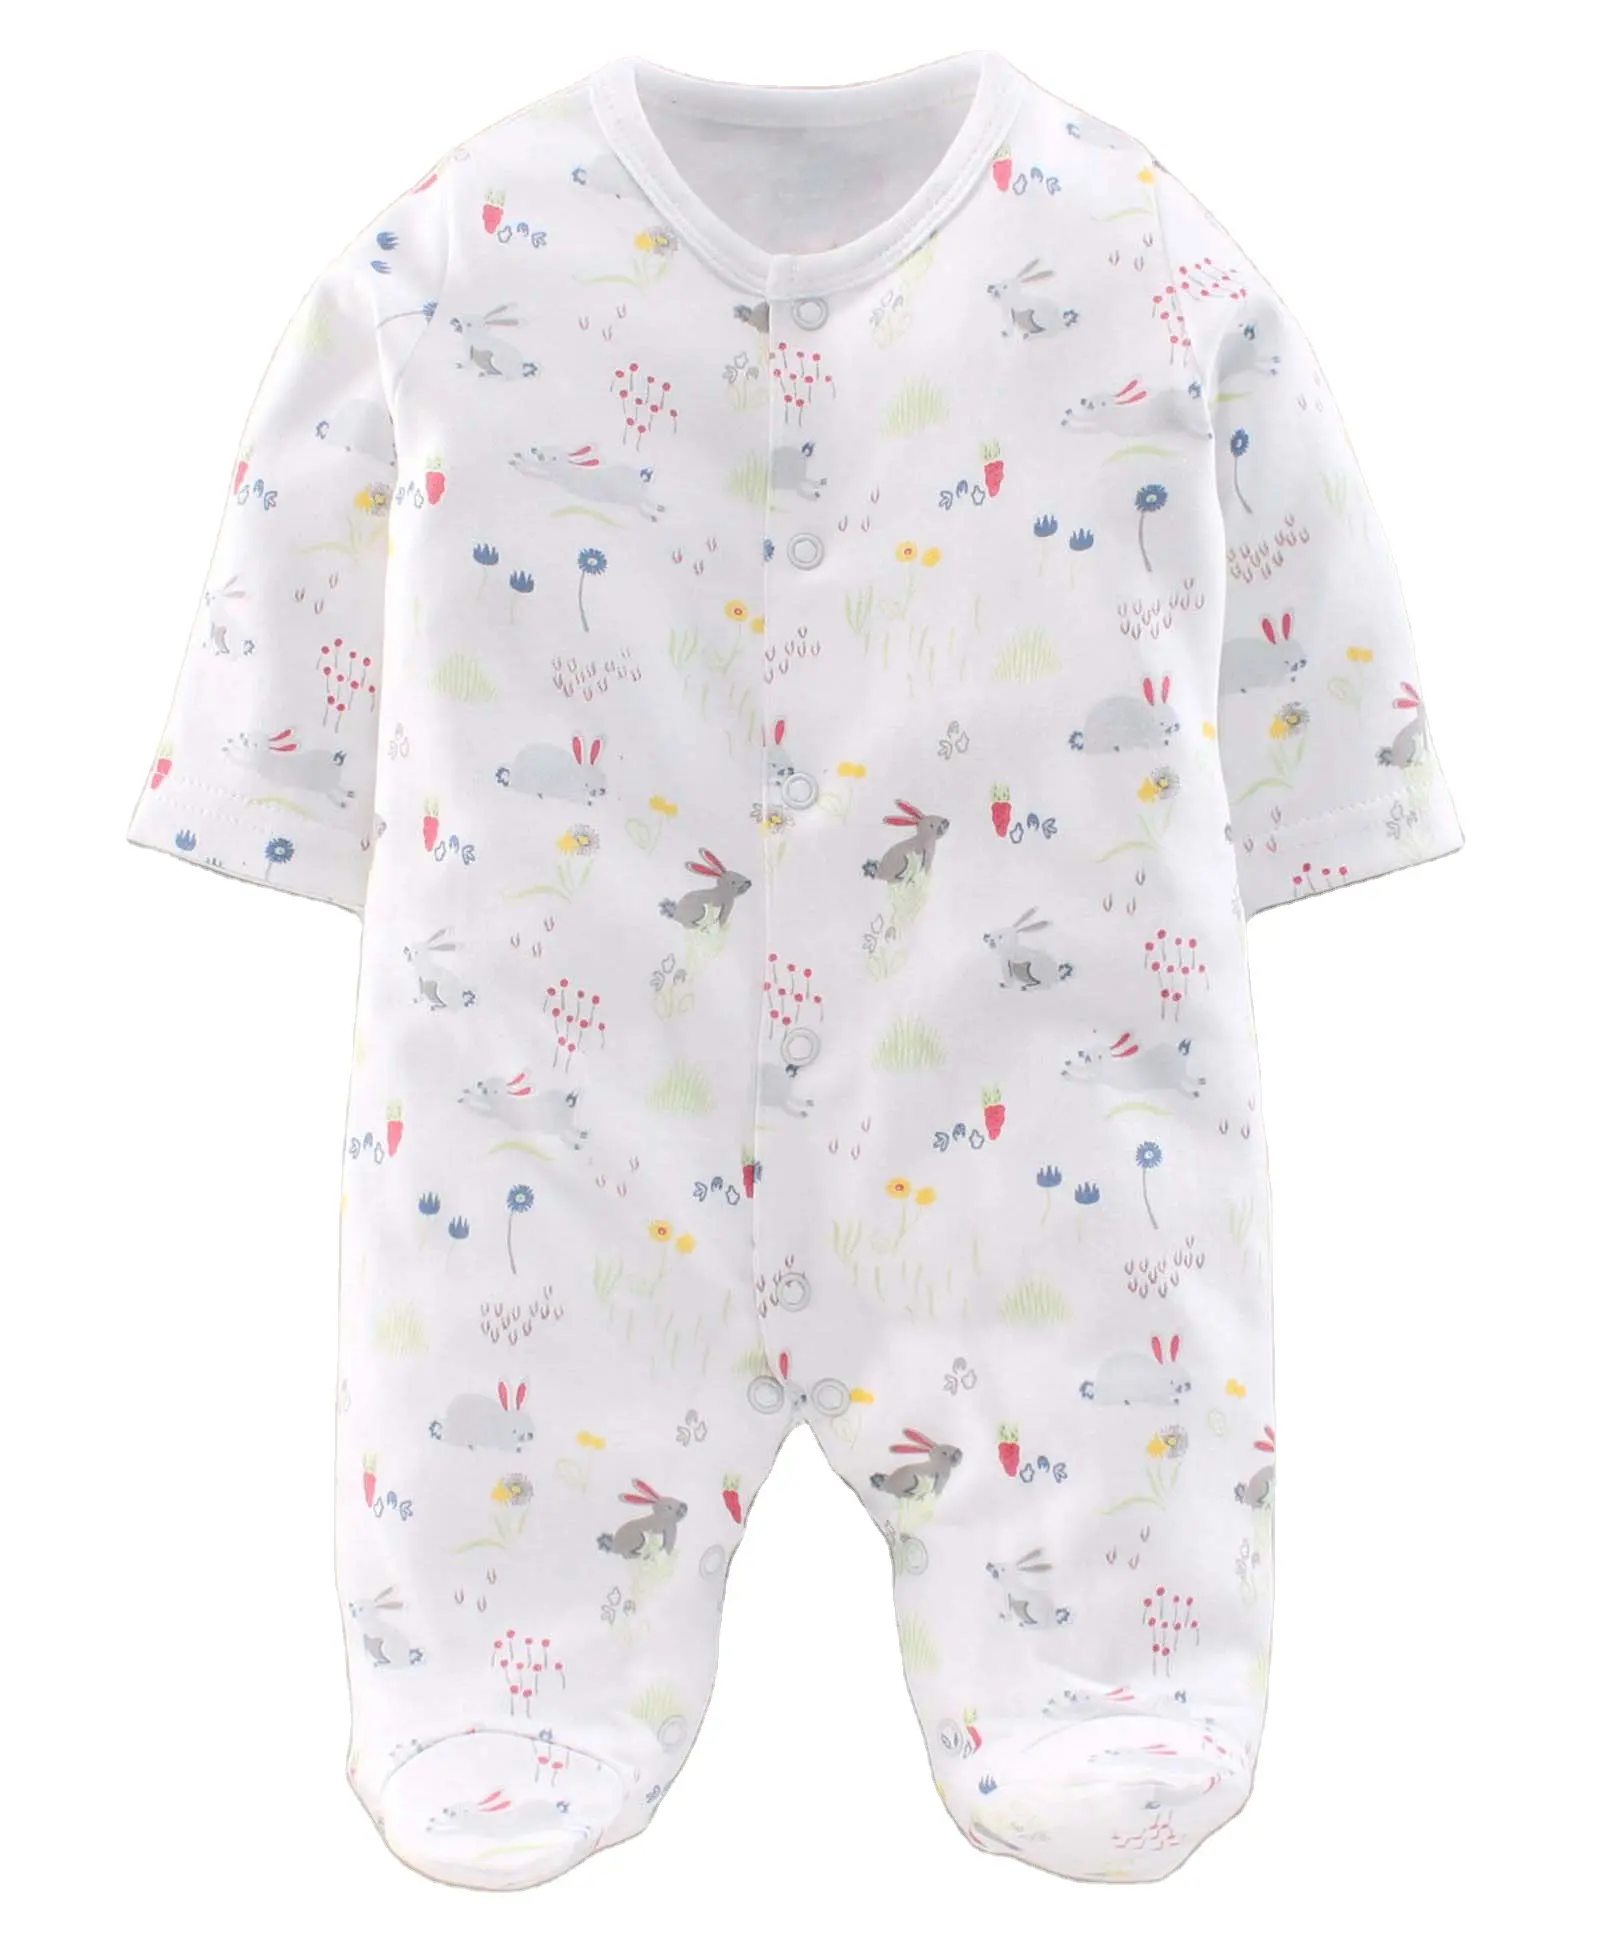 Natural latest design front snap closing whole sale price cute baby romper with foot